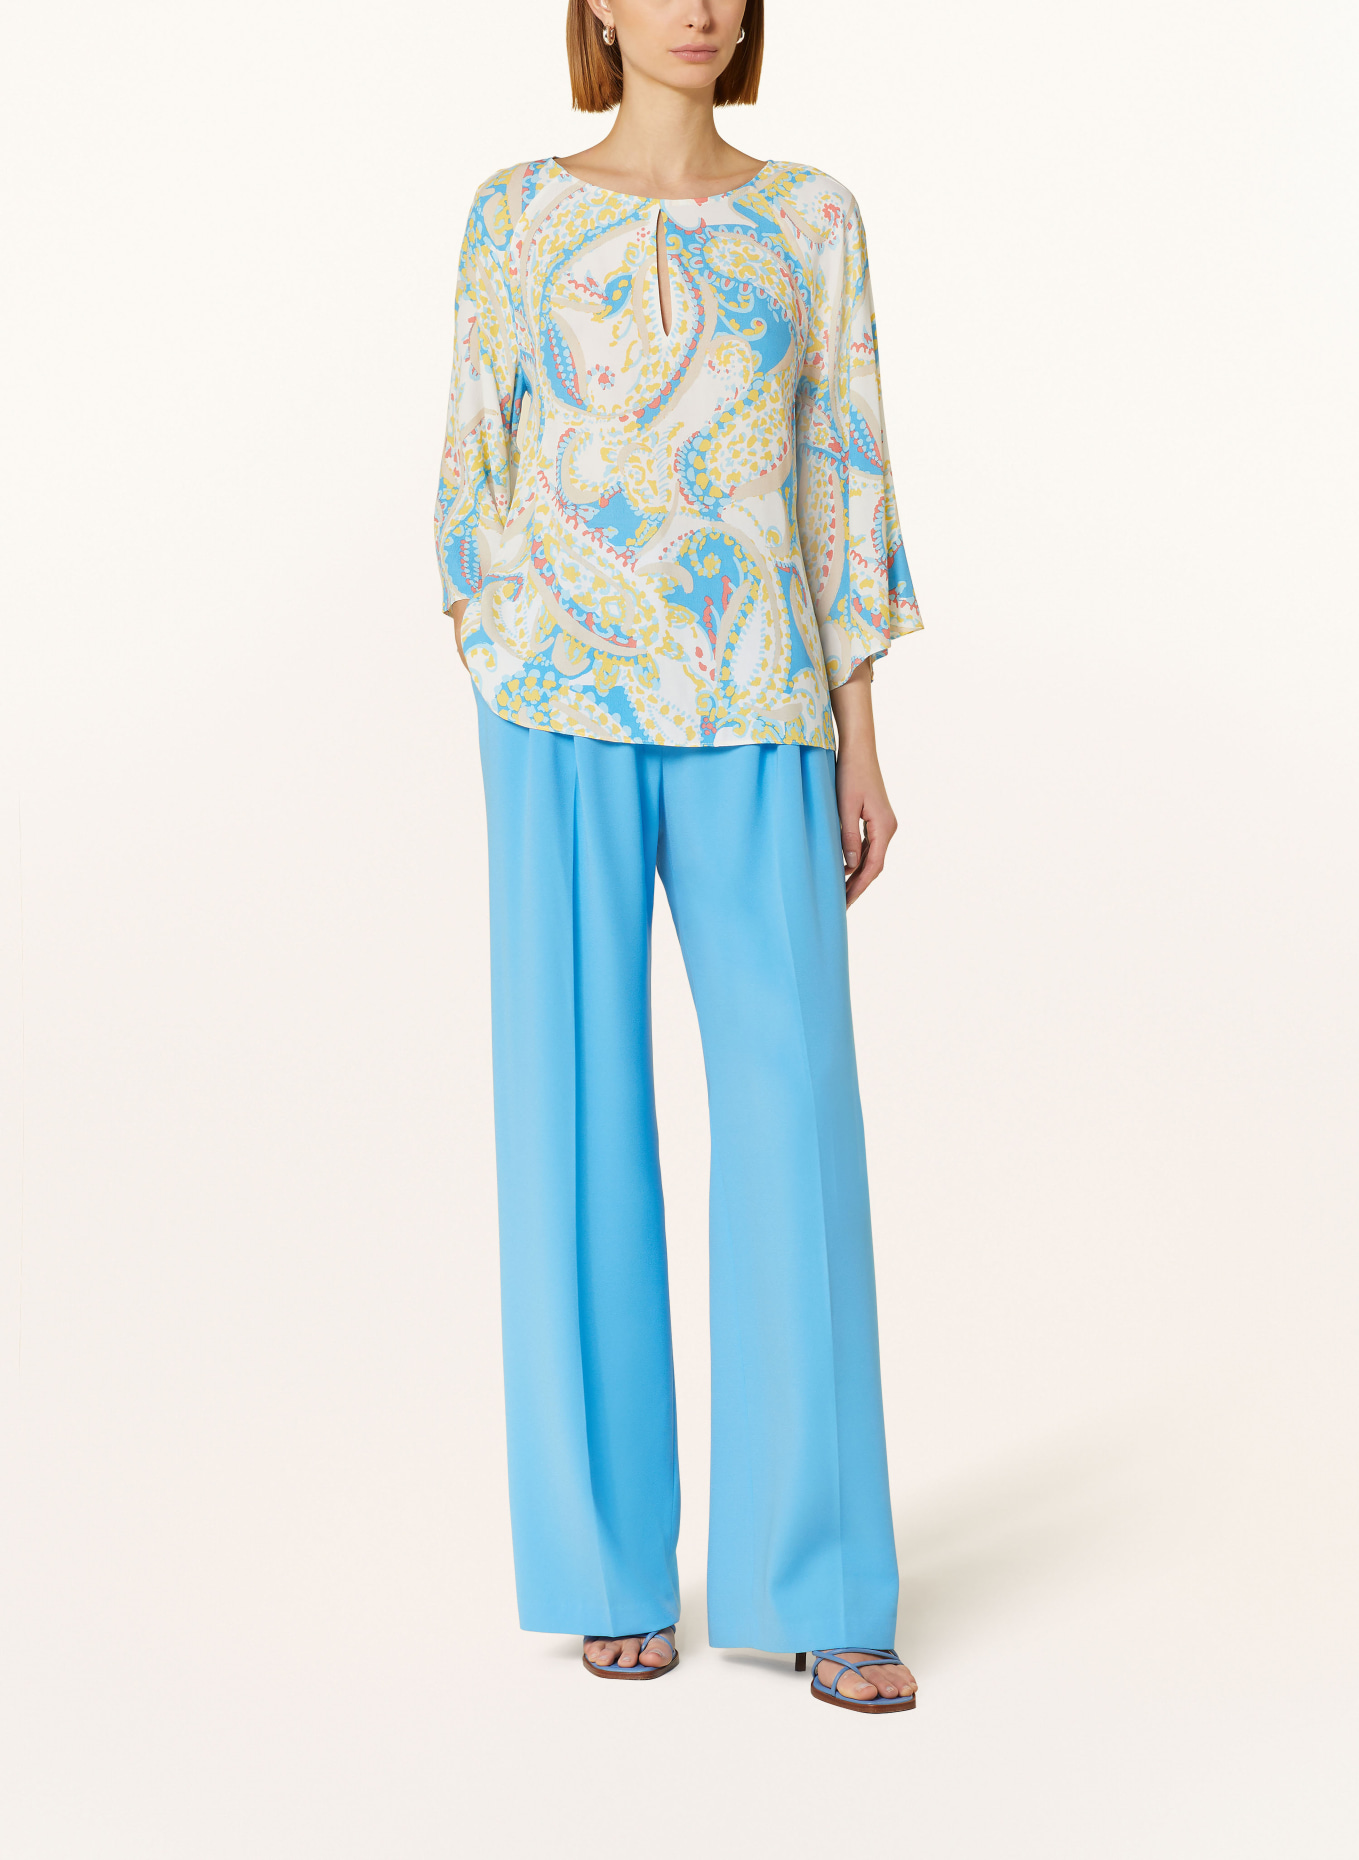 s.Oliver BLACK LABEL Shirt blouse with 3/4 sleeves, Color: LIGHT BLUE/ BEIGE/ YELLOW (Image 2)